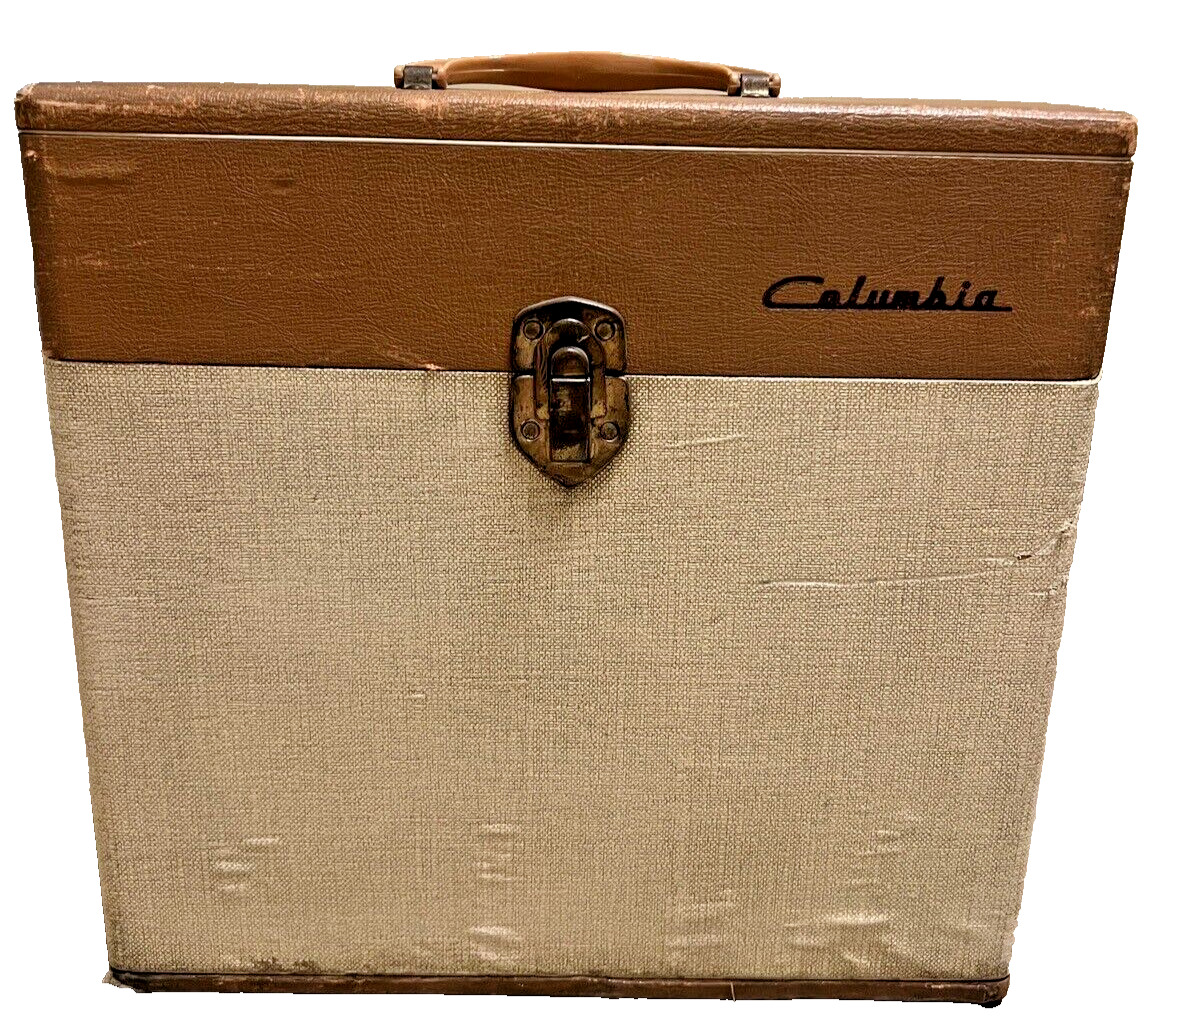 Vintage Columbia Record Case Owned By Al Rockwell Music DJ KRNT 40s Des Moines